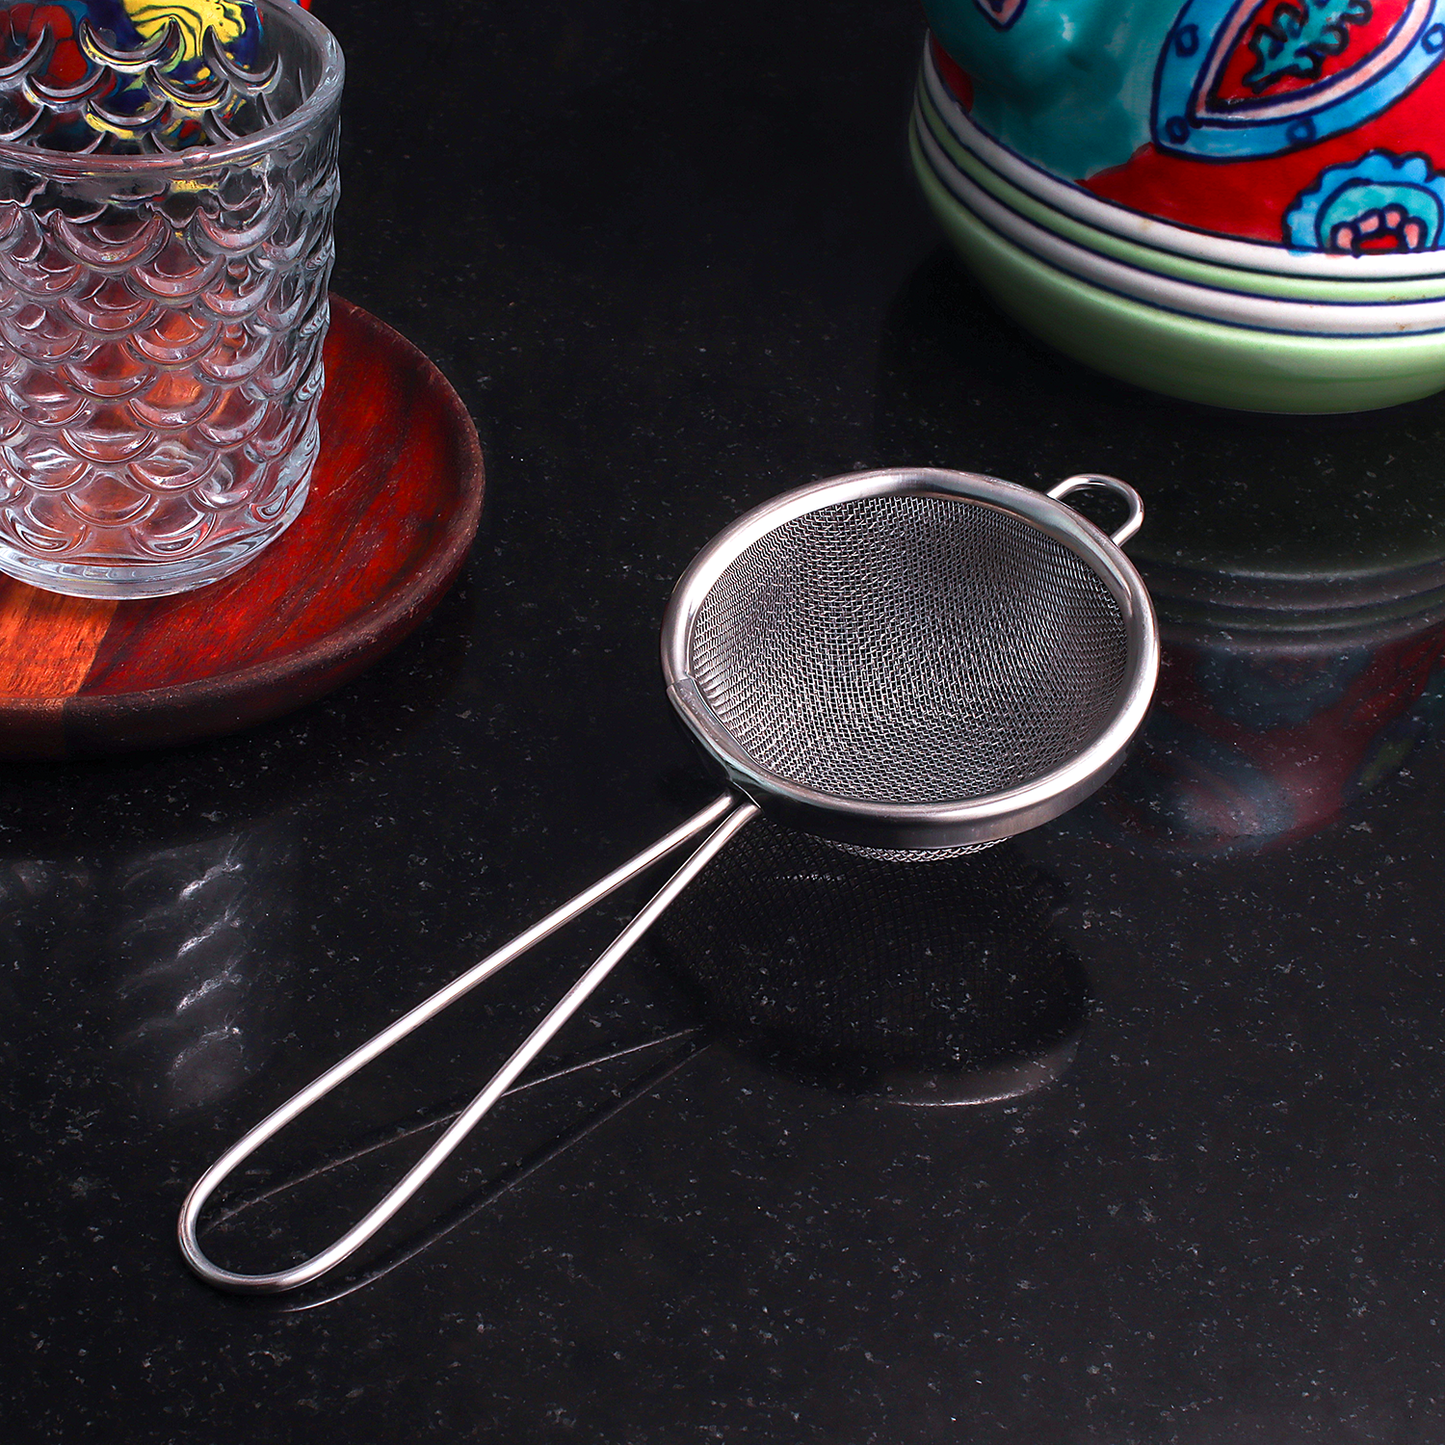 Basket Bum's Stainless Steel Double Mesh Chai Channi A Brew Lover's Essential.